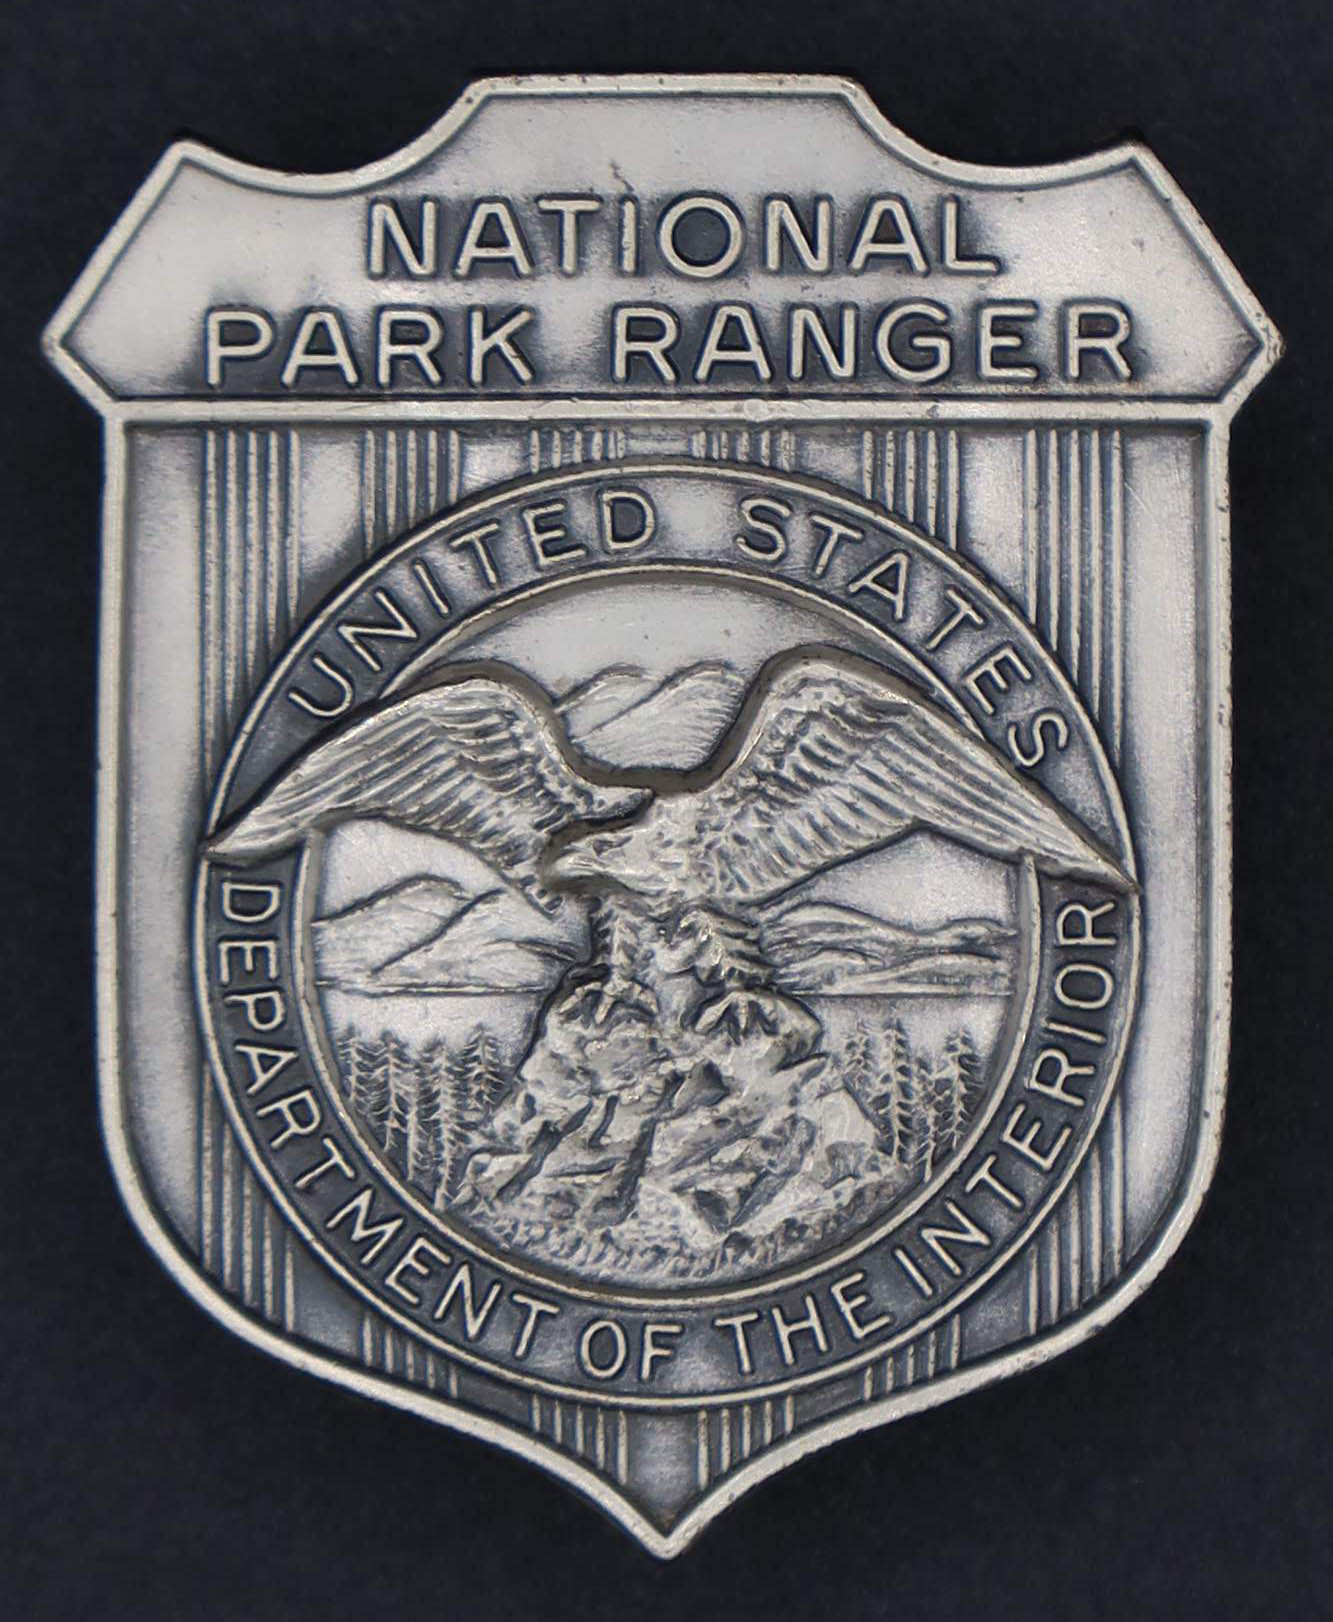 Silver shield-shaped badge marked National Park Ranger. The round seal in the middle has an eagle looking to its right.